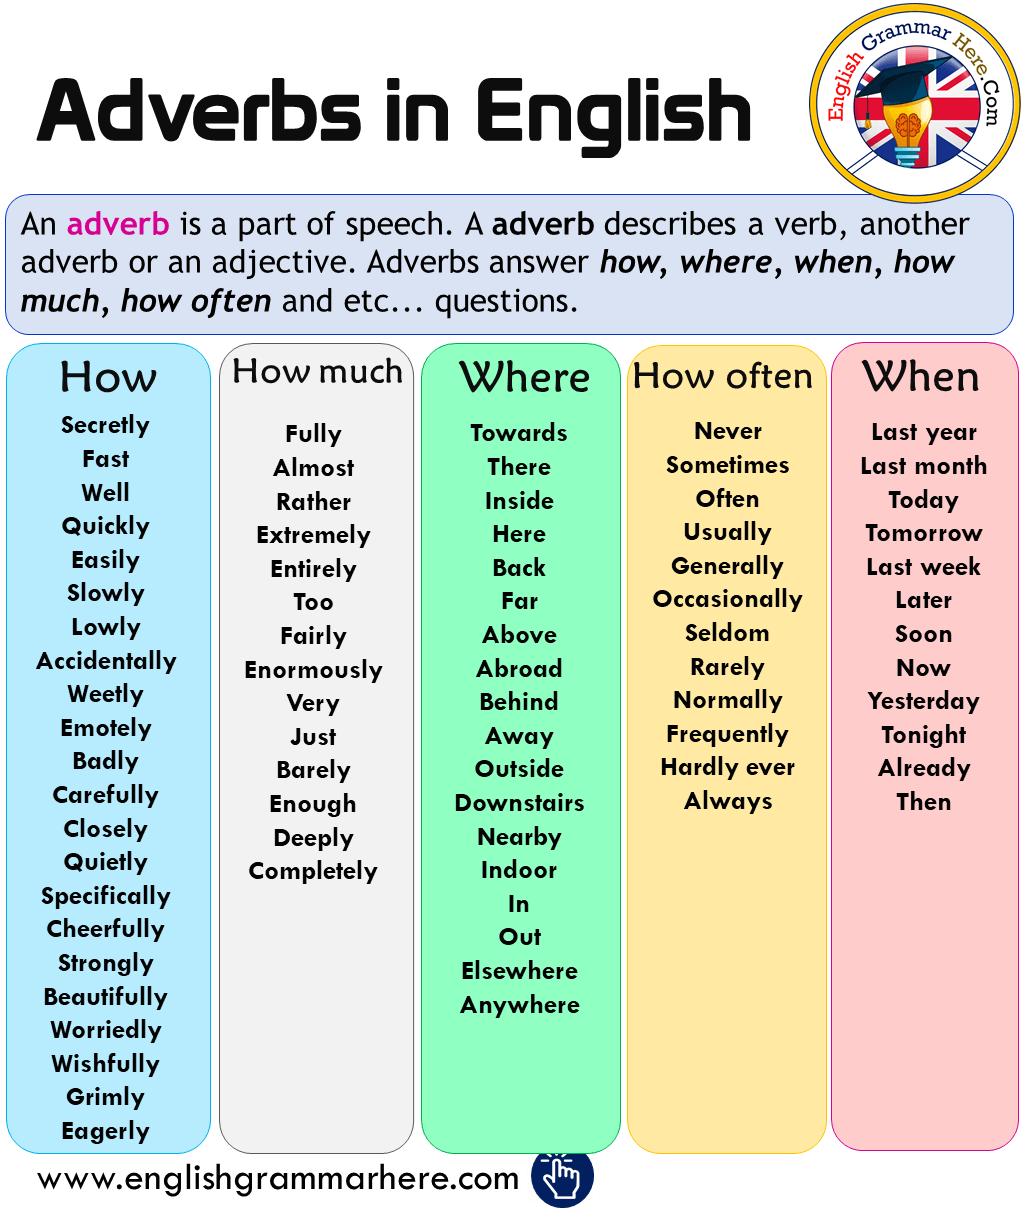 Adverbs in English, How, How Much, Where, How Often, When